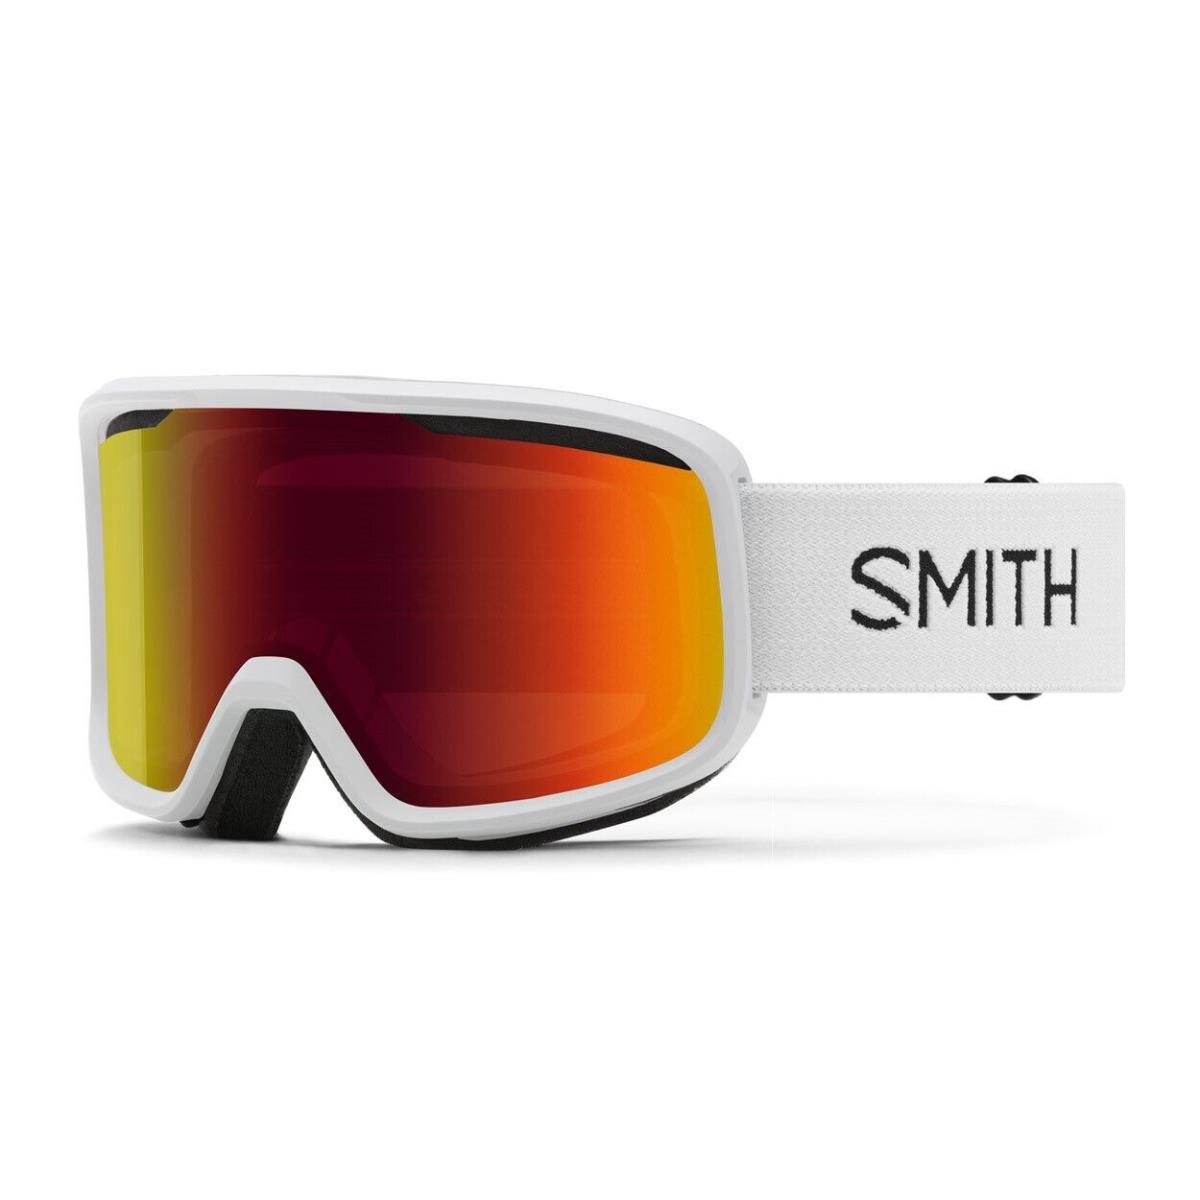 Smith Frontier Snow Goggles White Frame Red Sol-x Mirror Lens 2023